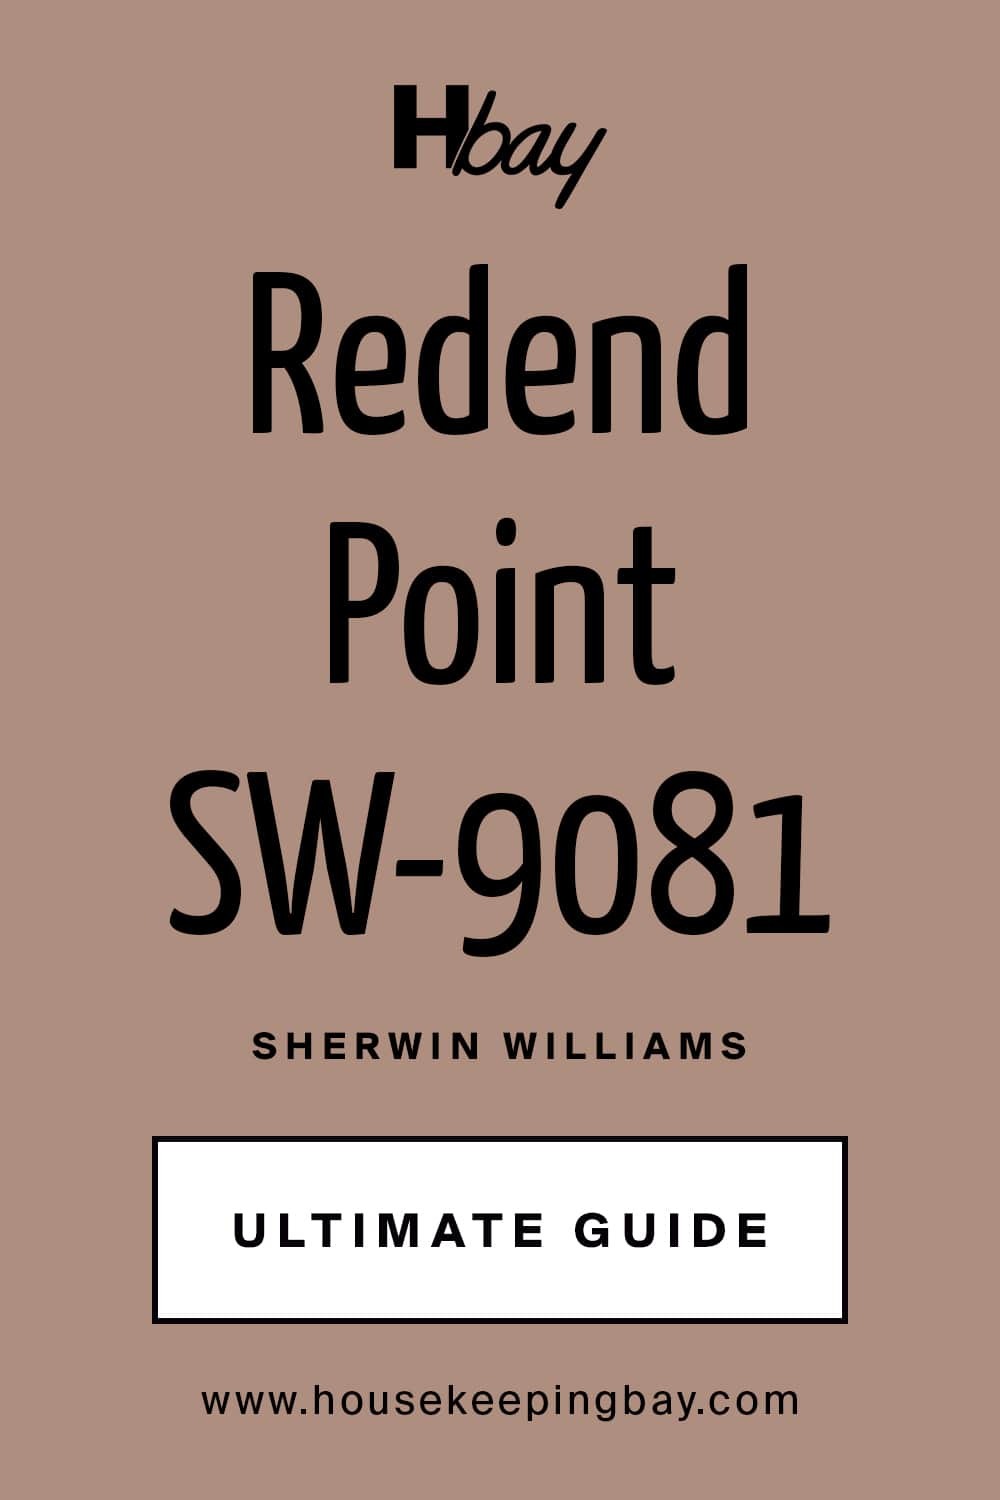 Redend Point SW 9081 Paint Color by Sherwin Williams Ultimate Guide